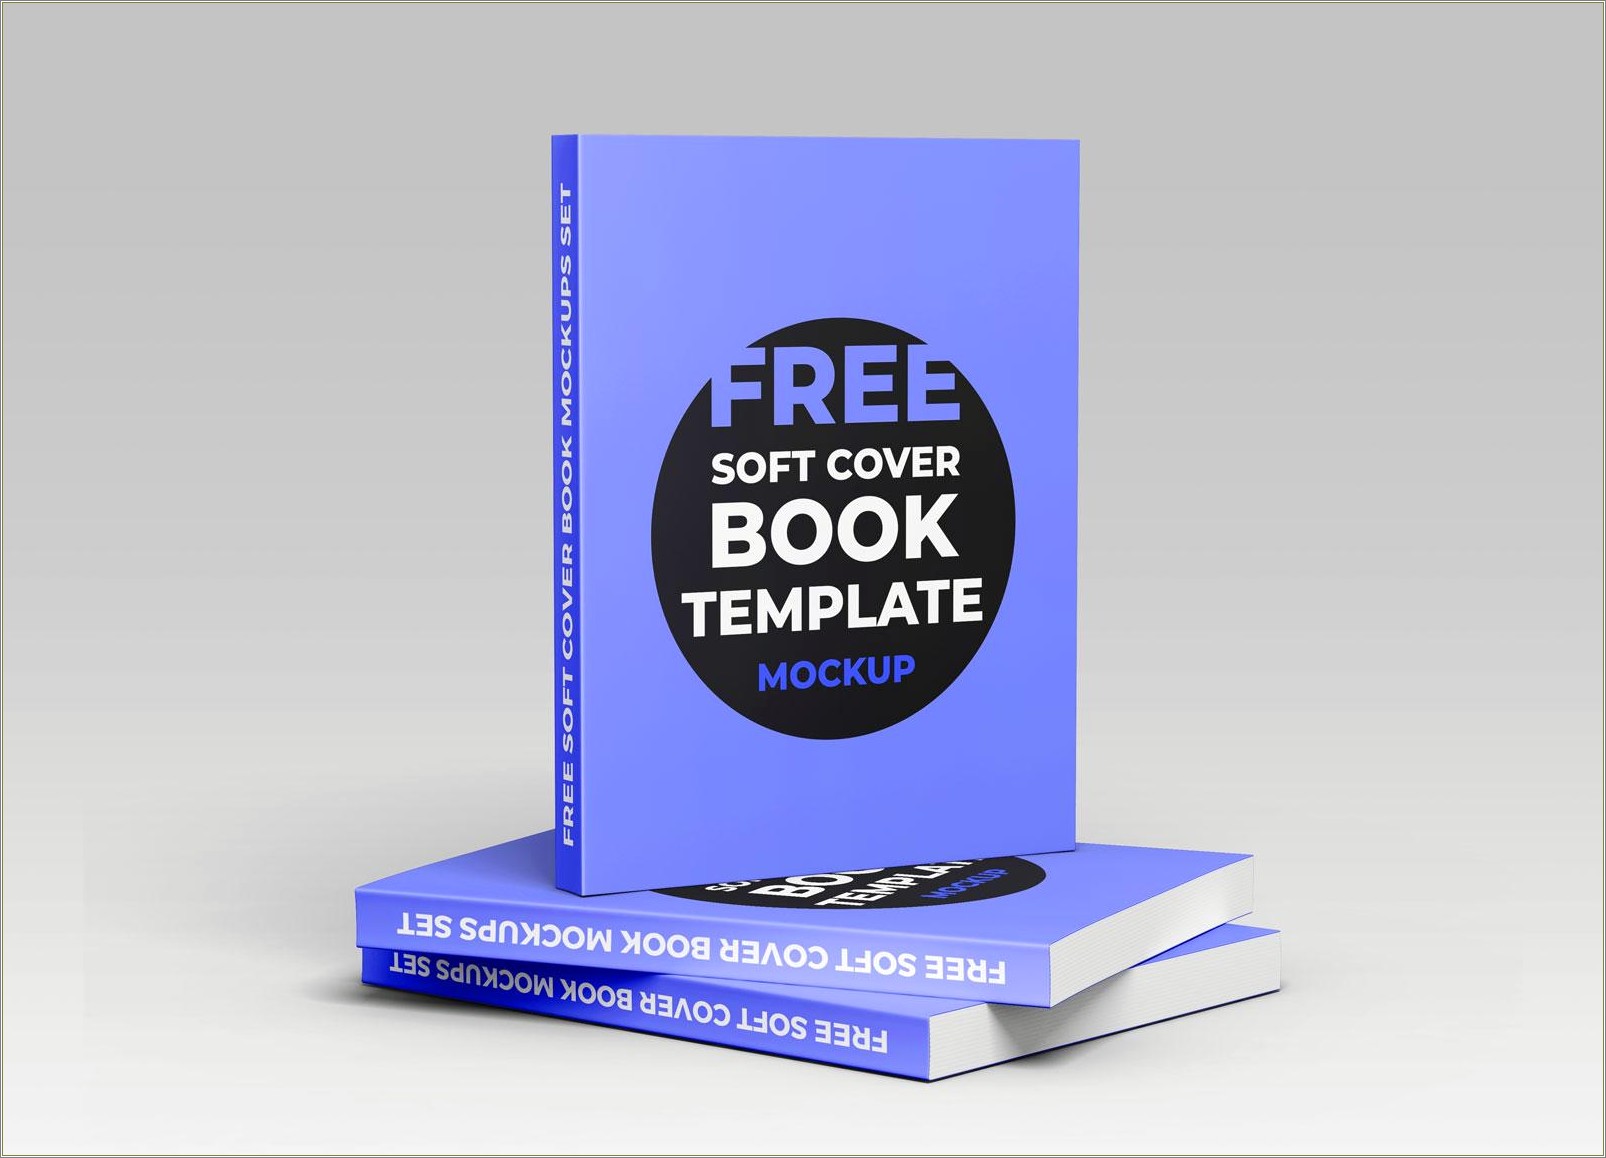 Free No Royalty Book Cover Templates